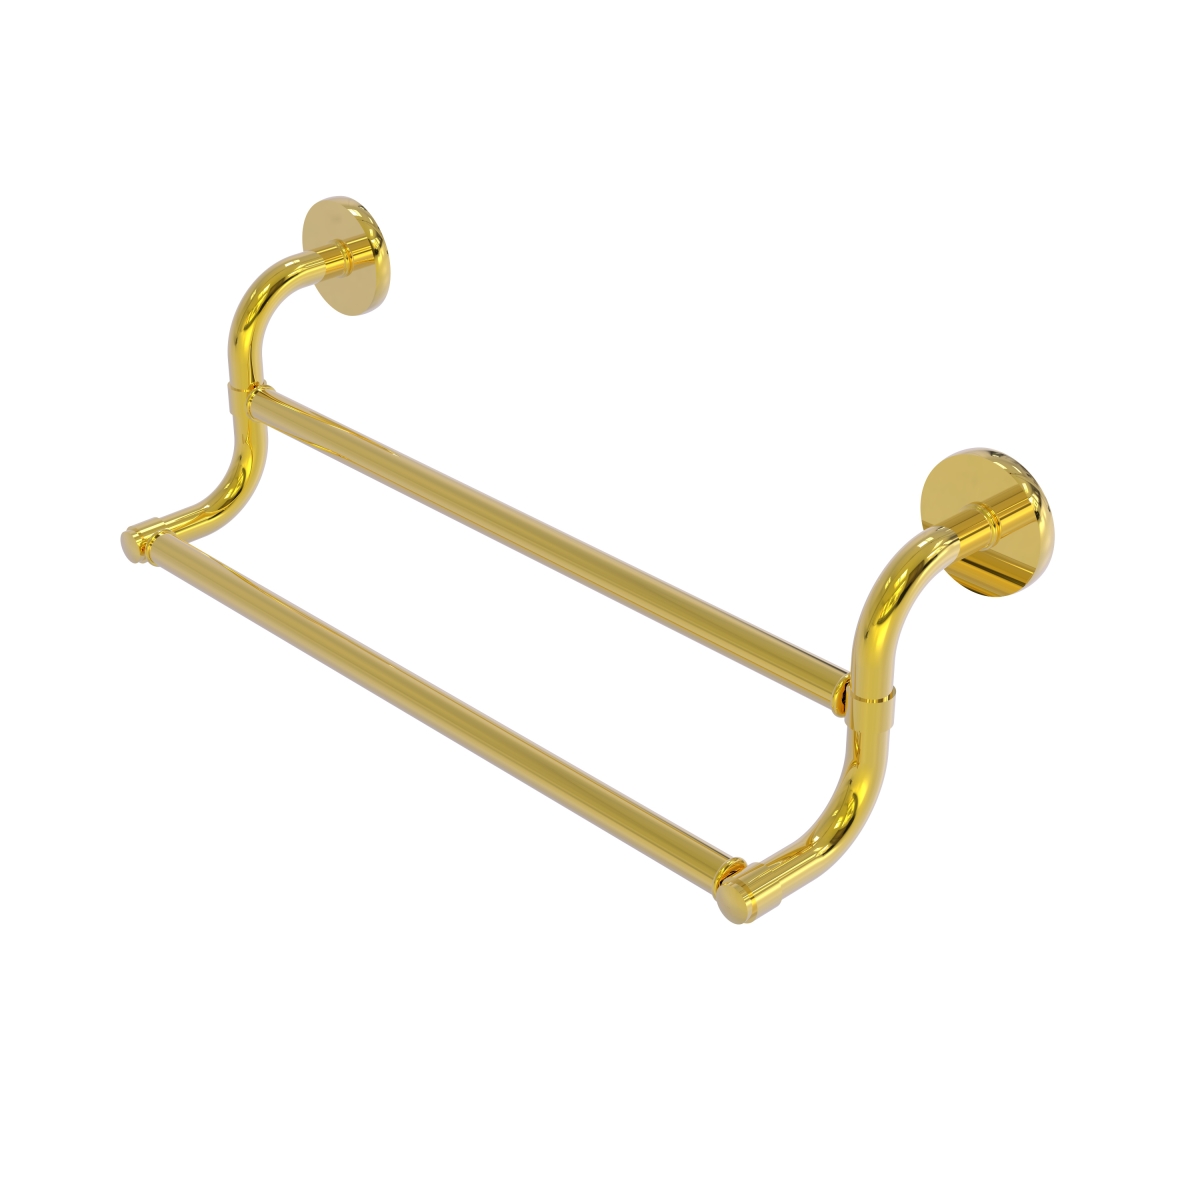 Allied Brass RM-72-36-PB 36 in. Remi Collection Double Towel Bar, Polished Brass